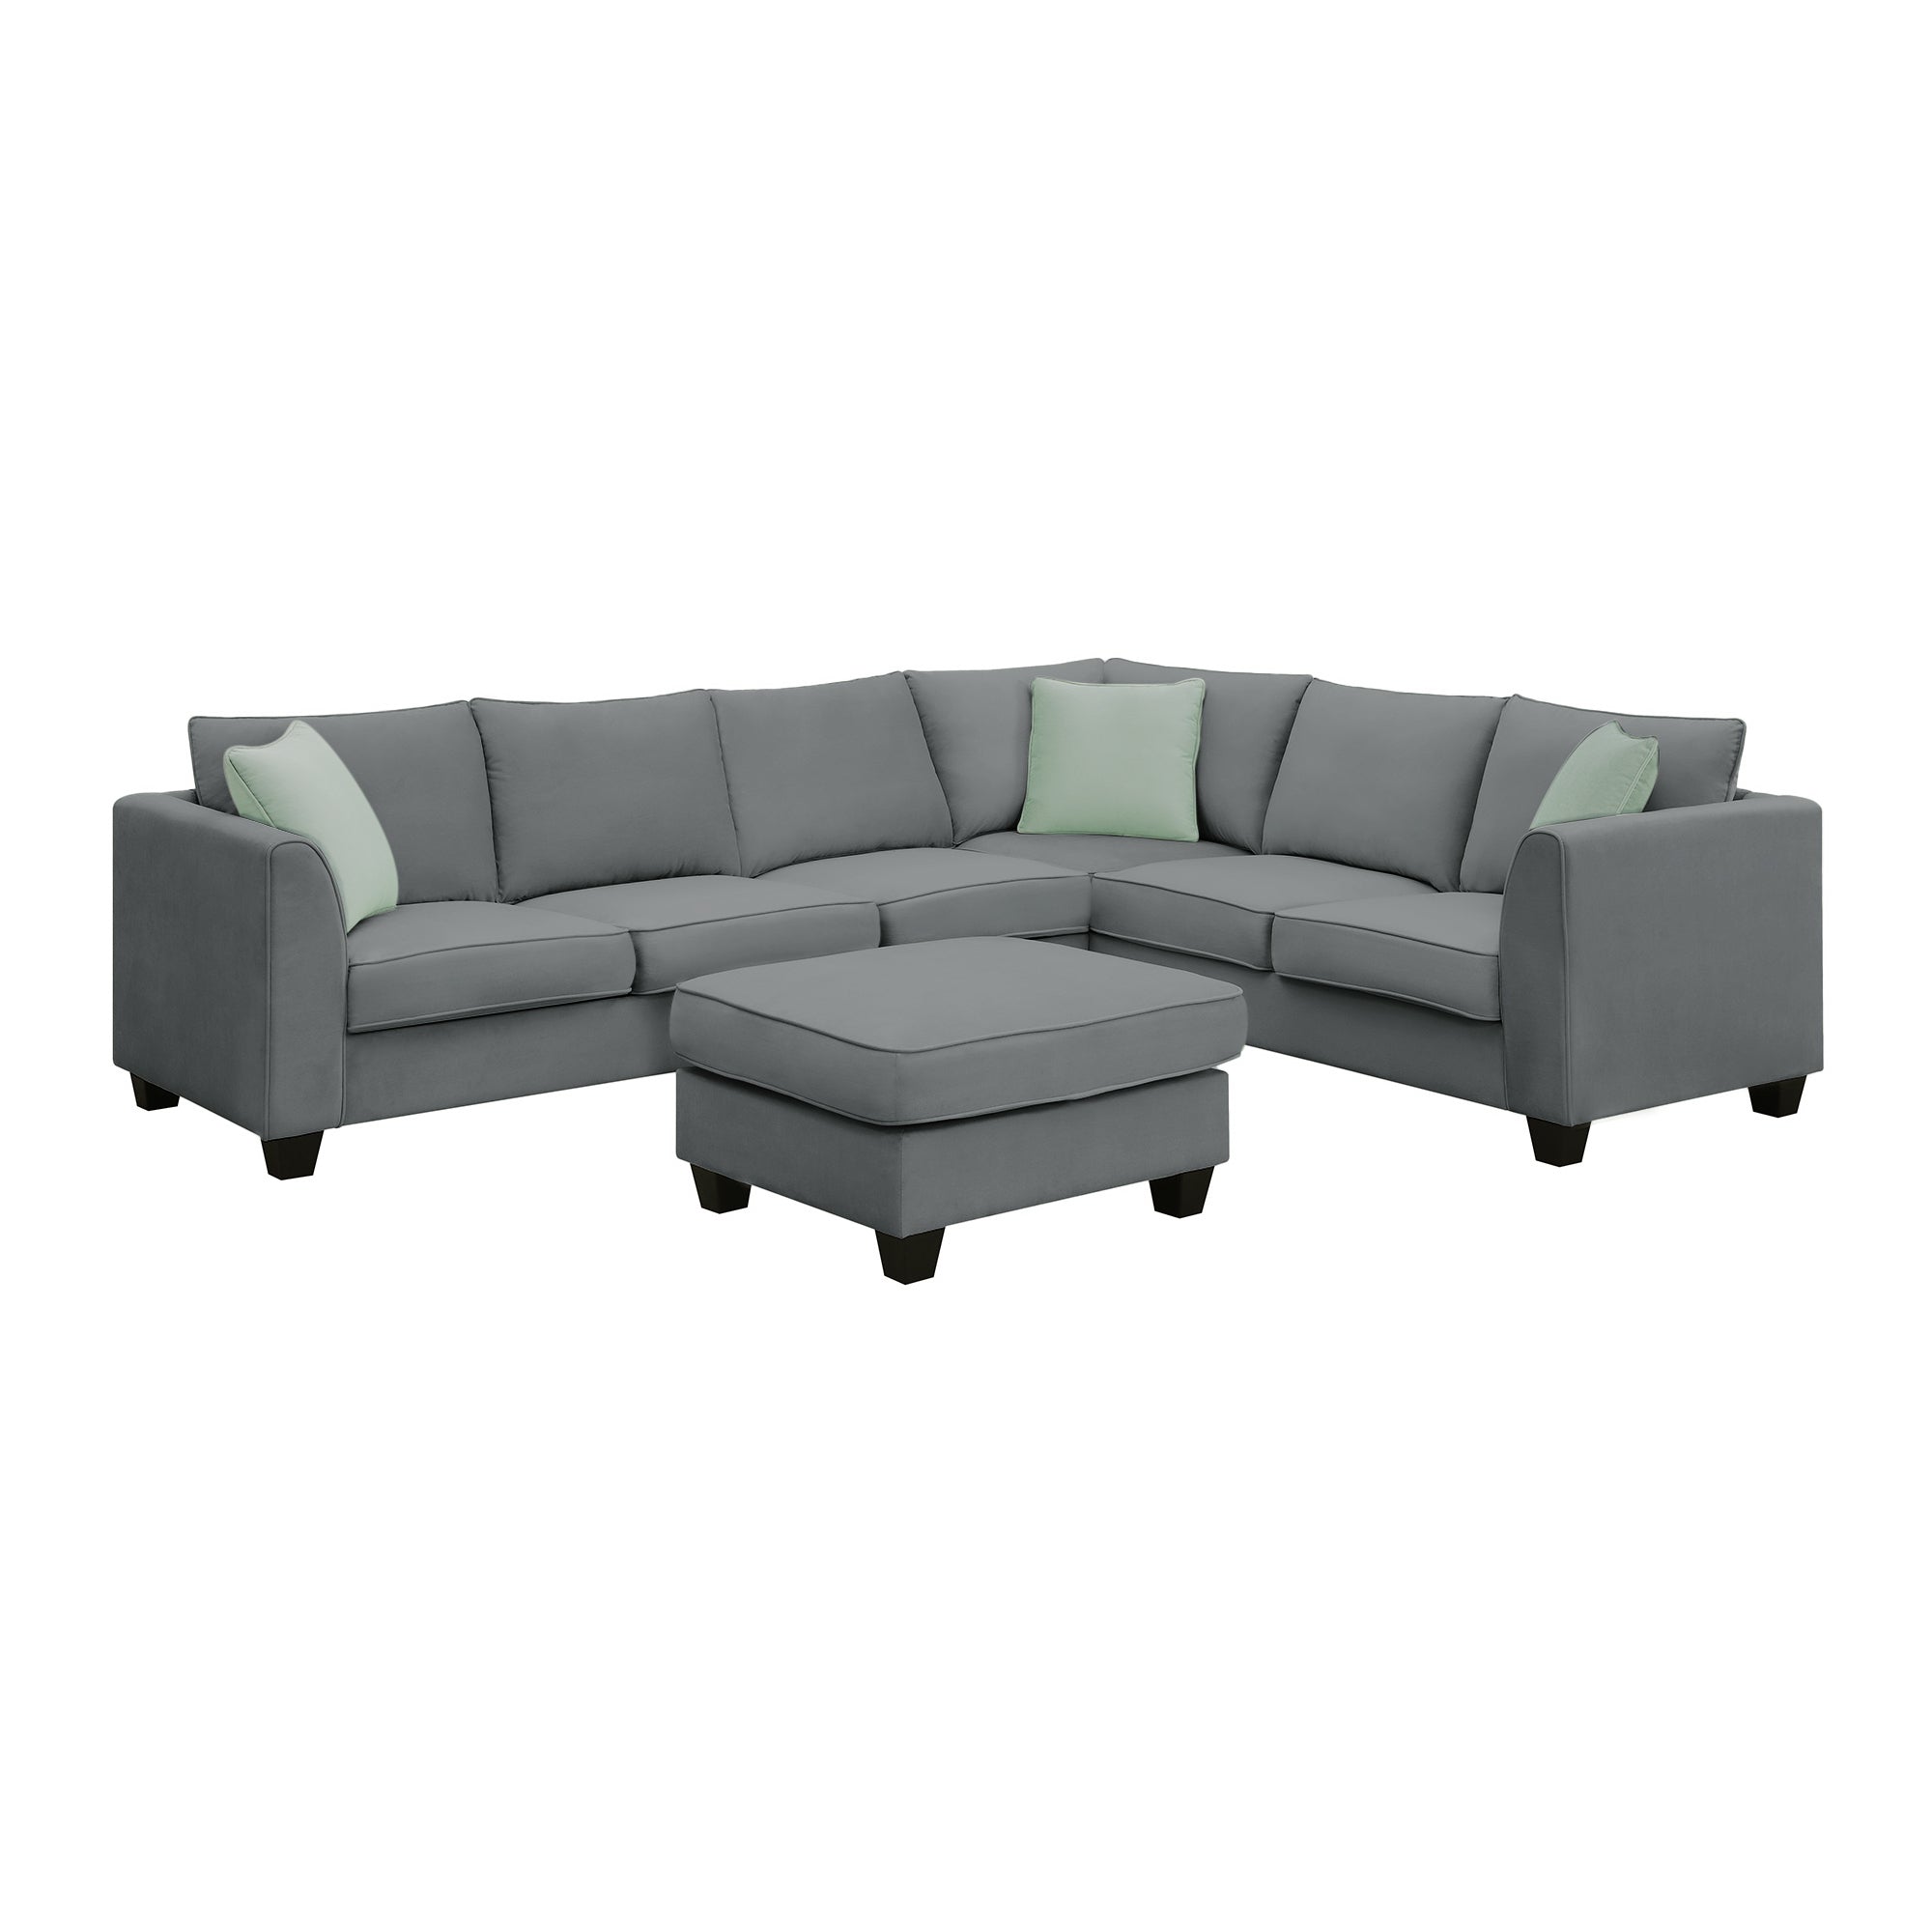 Grey 7-Seat Large Modular Sectional Sofa w/ Ottoman-Stationary Sectionals-American Furniture Outlet